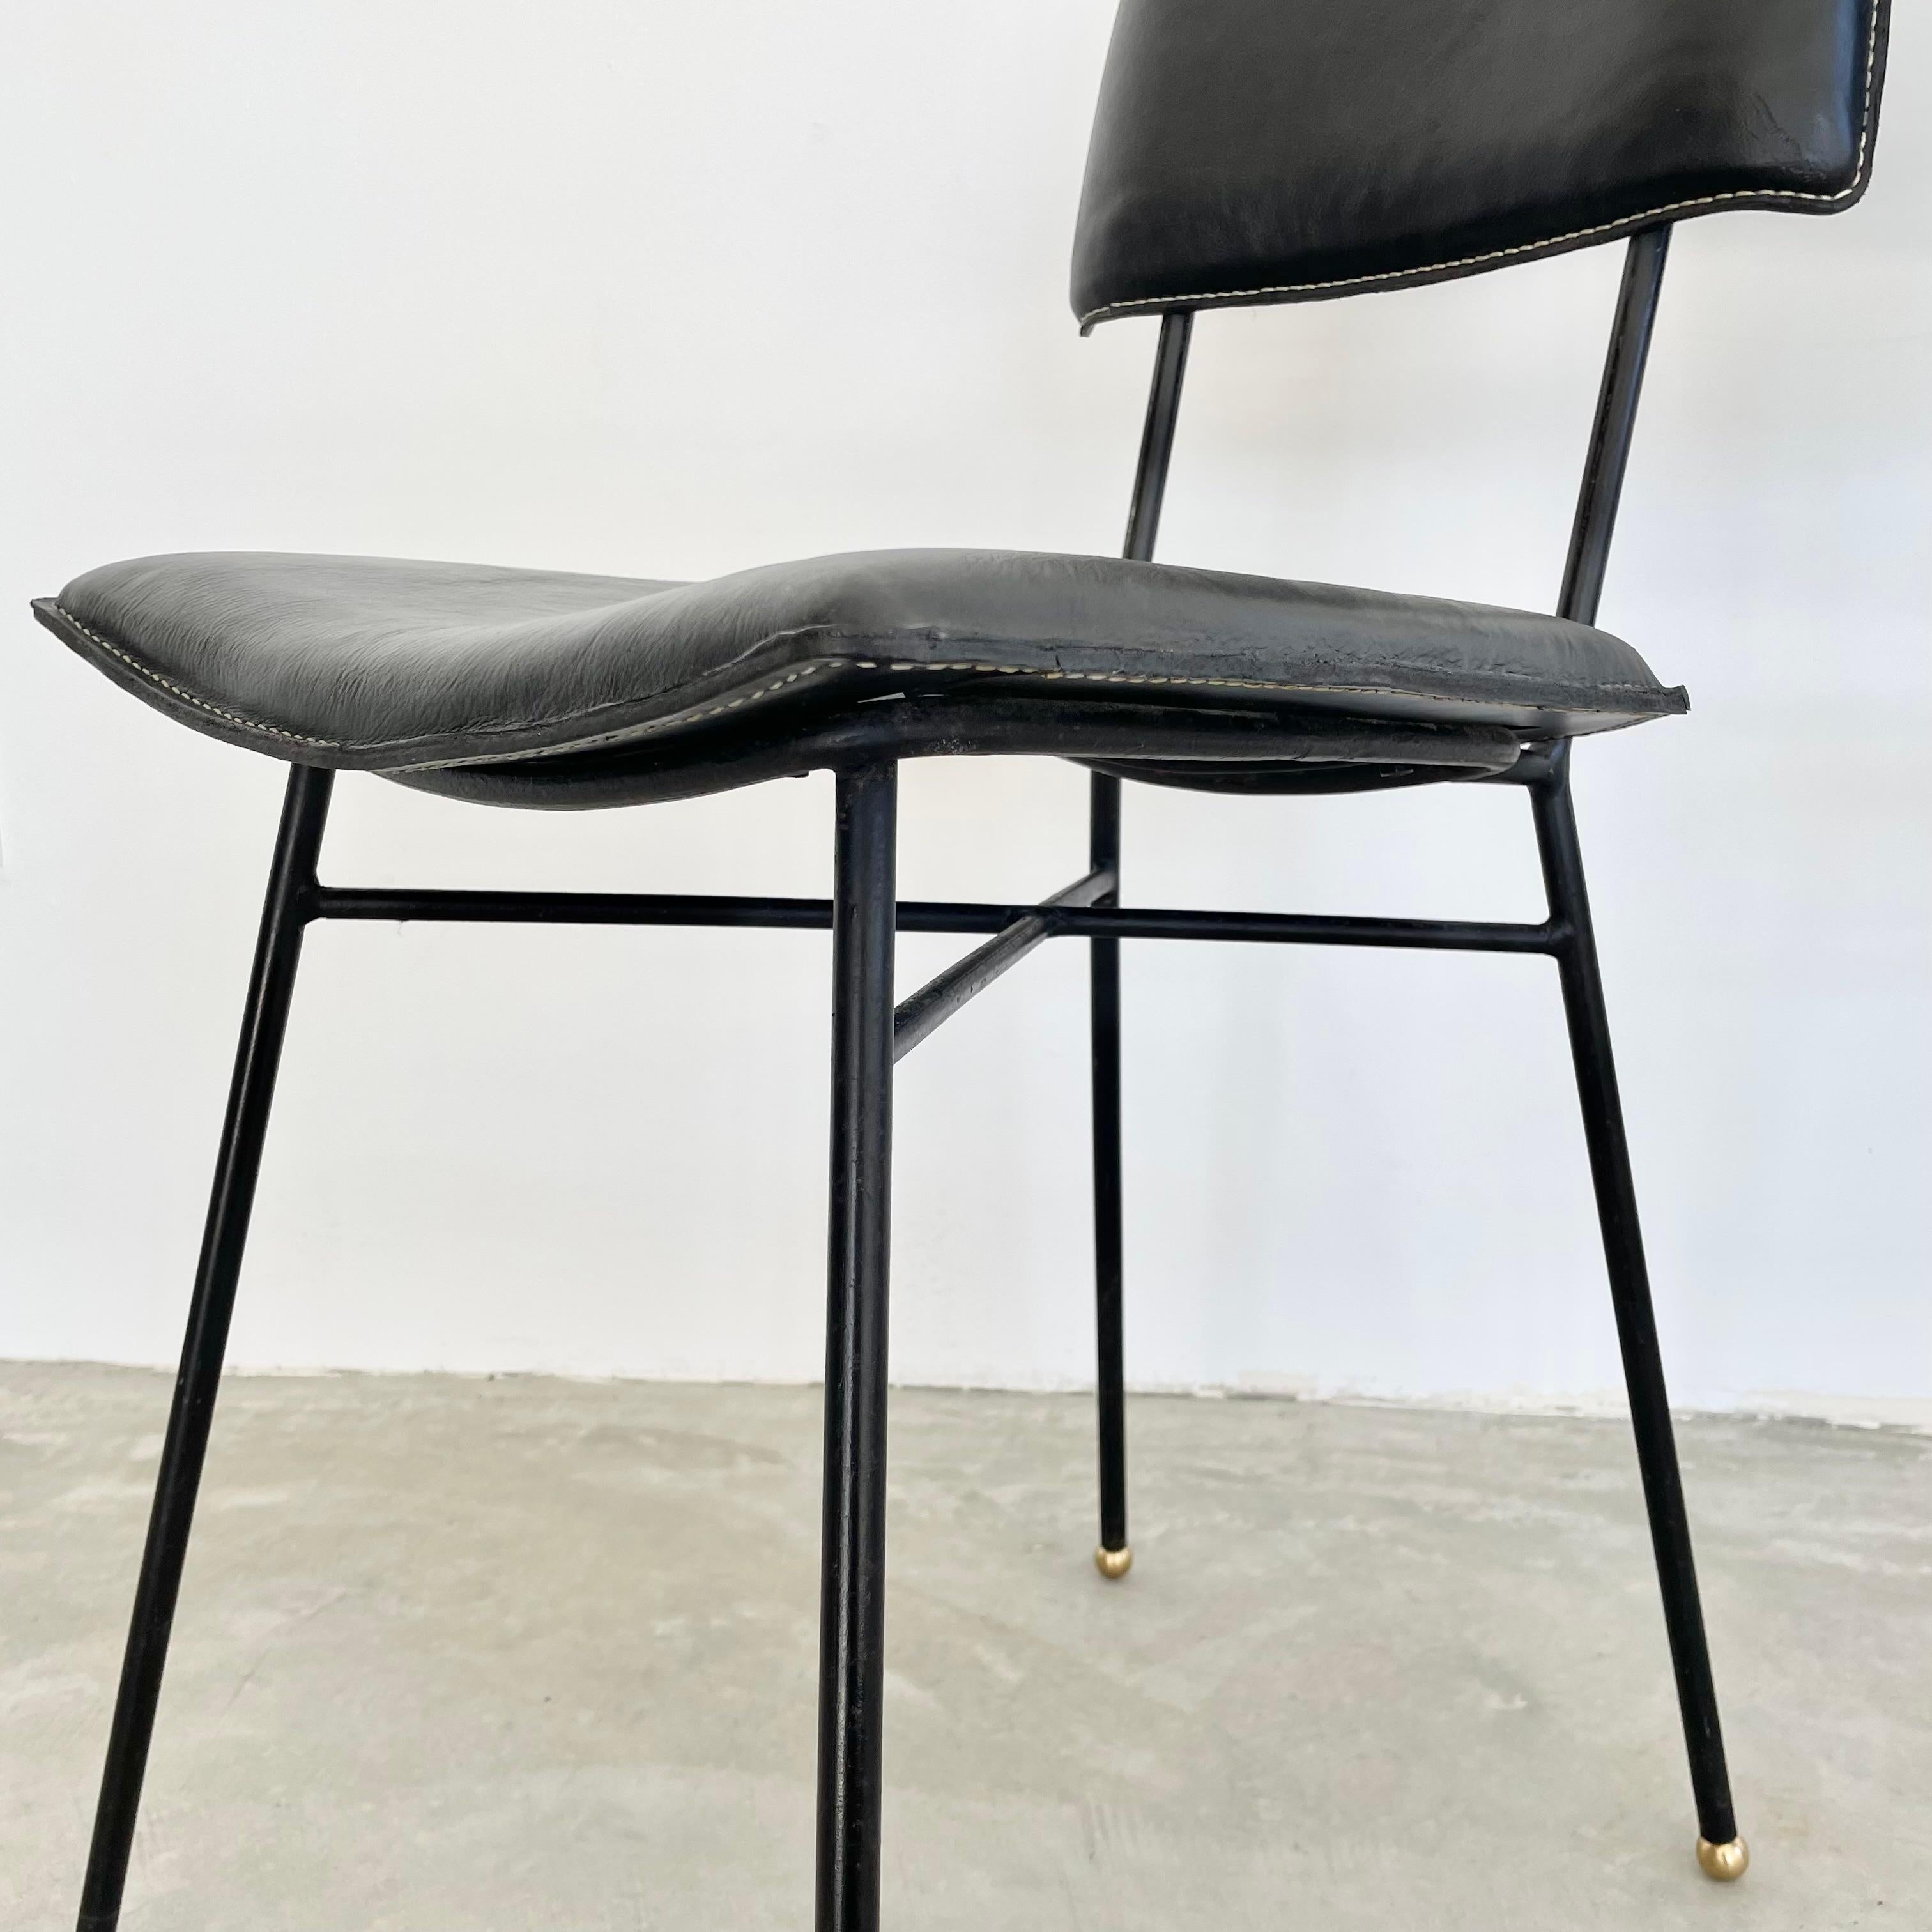 Mid-20th Century Jacques Adnet Black Leather Chair, 1950s France For Sale